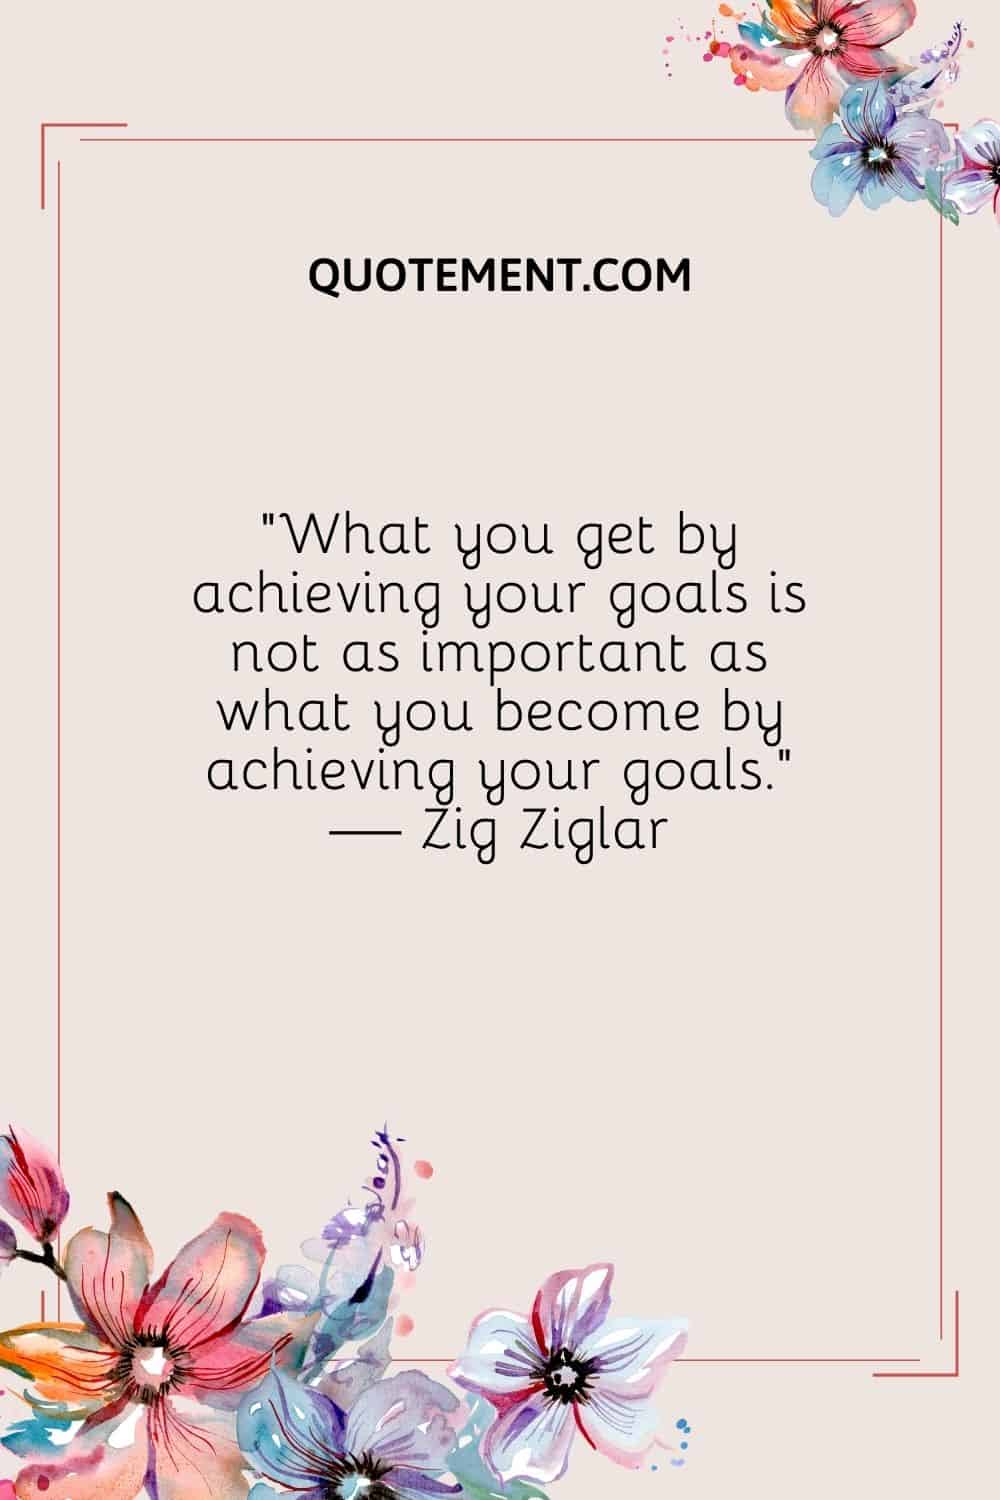 What you get by achieving your goals is not as important as what you become by achieving your goals. — Zig Ziglar